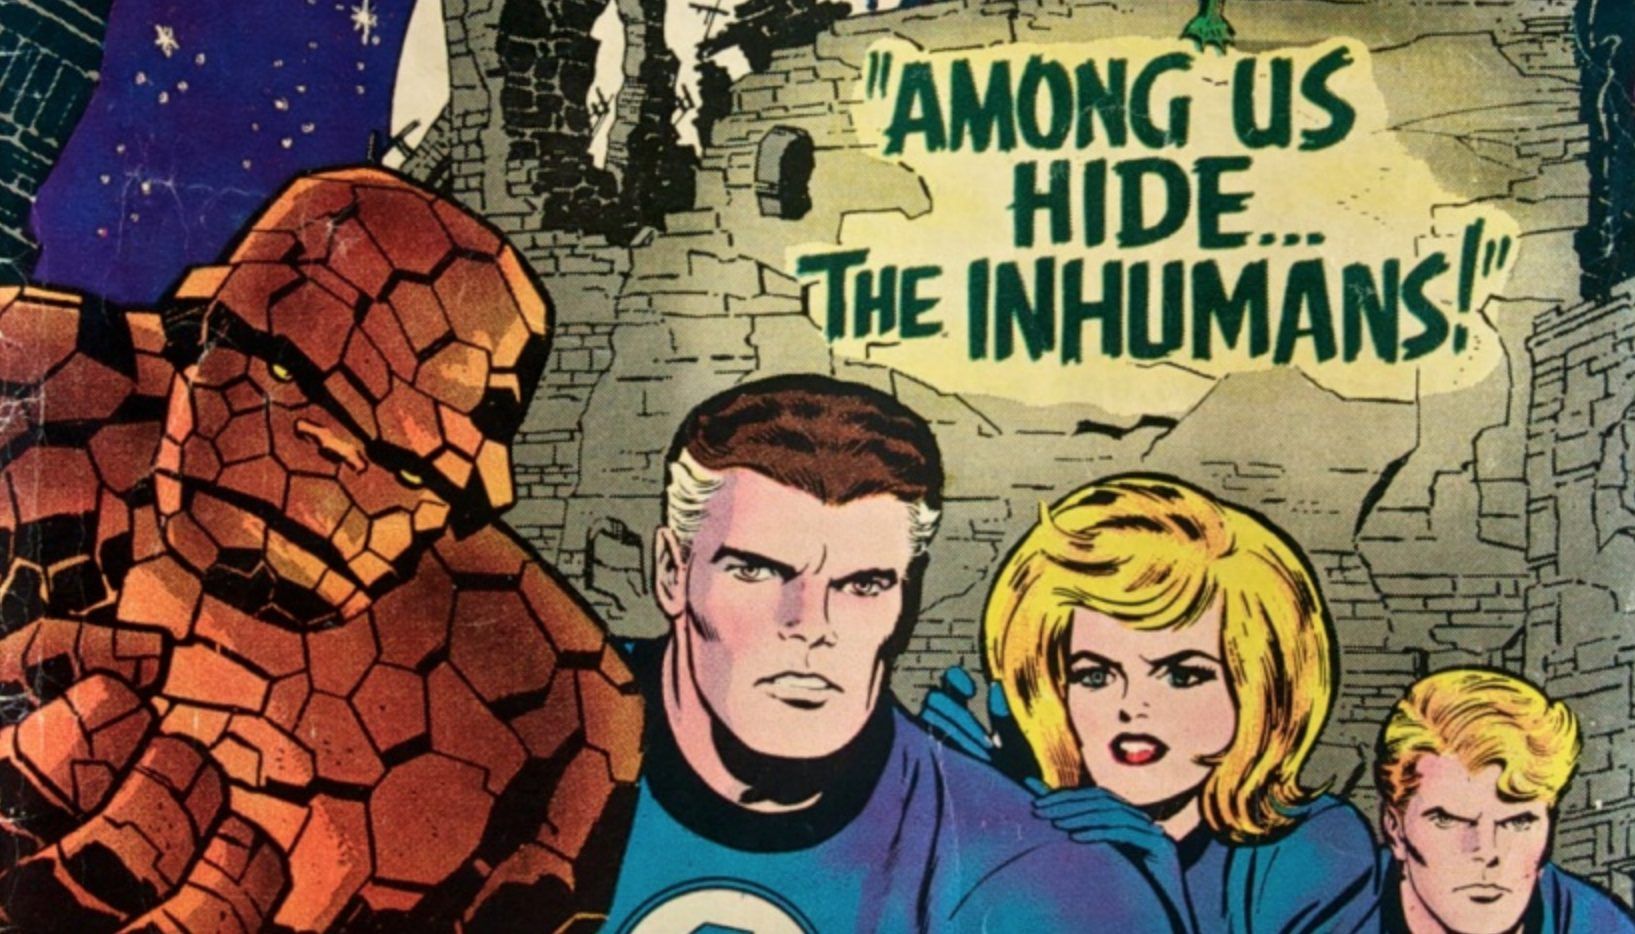 Fantastic Four Issue 45 Among Us Hide The Inhumans